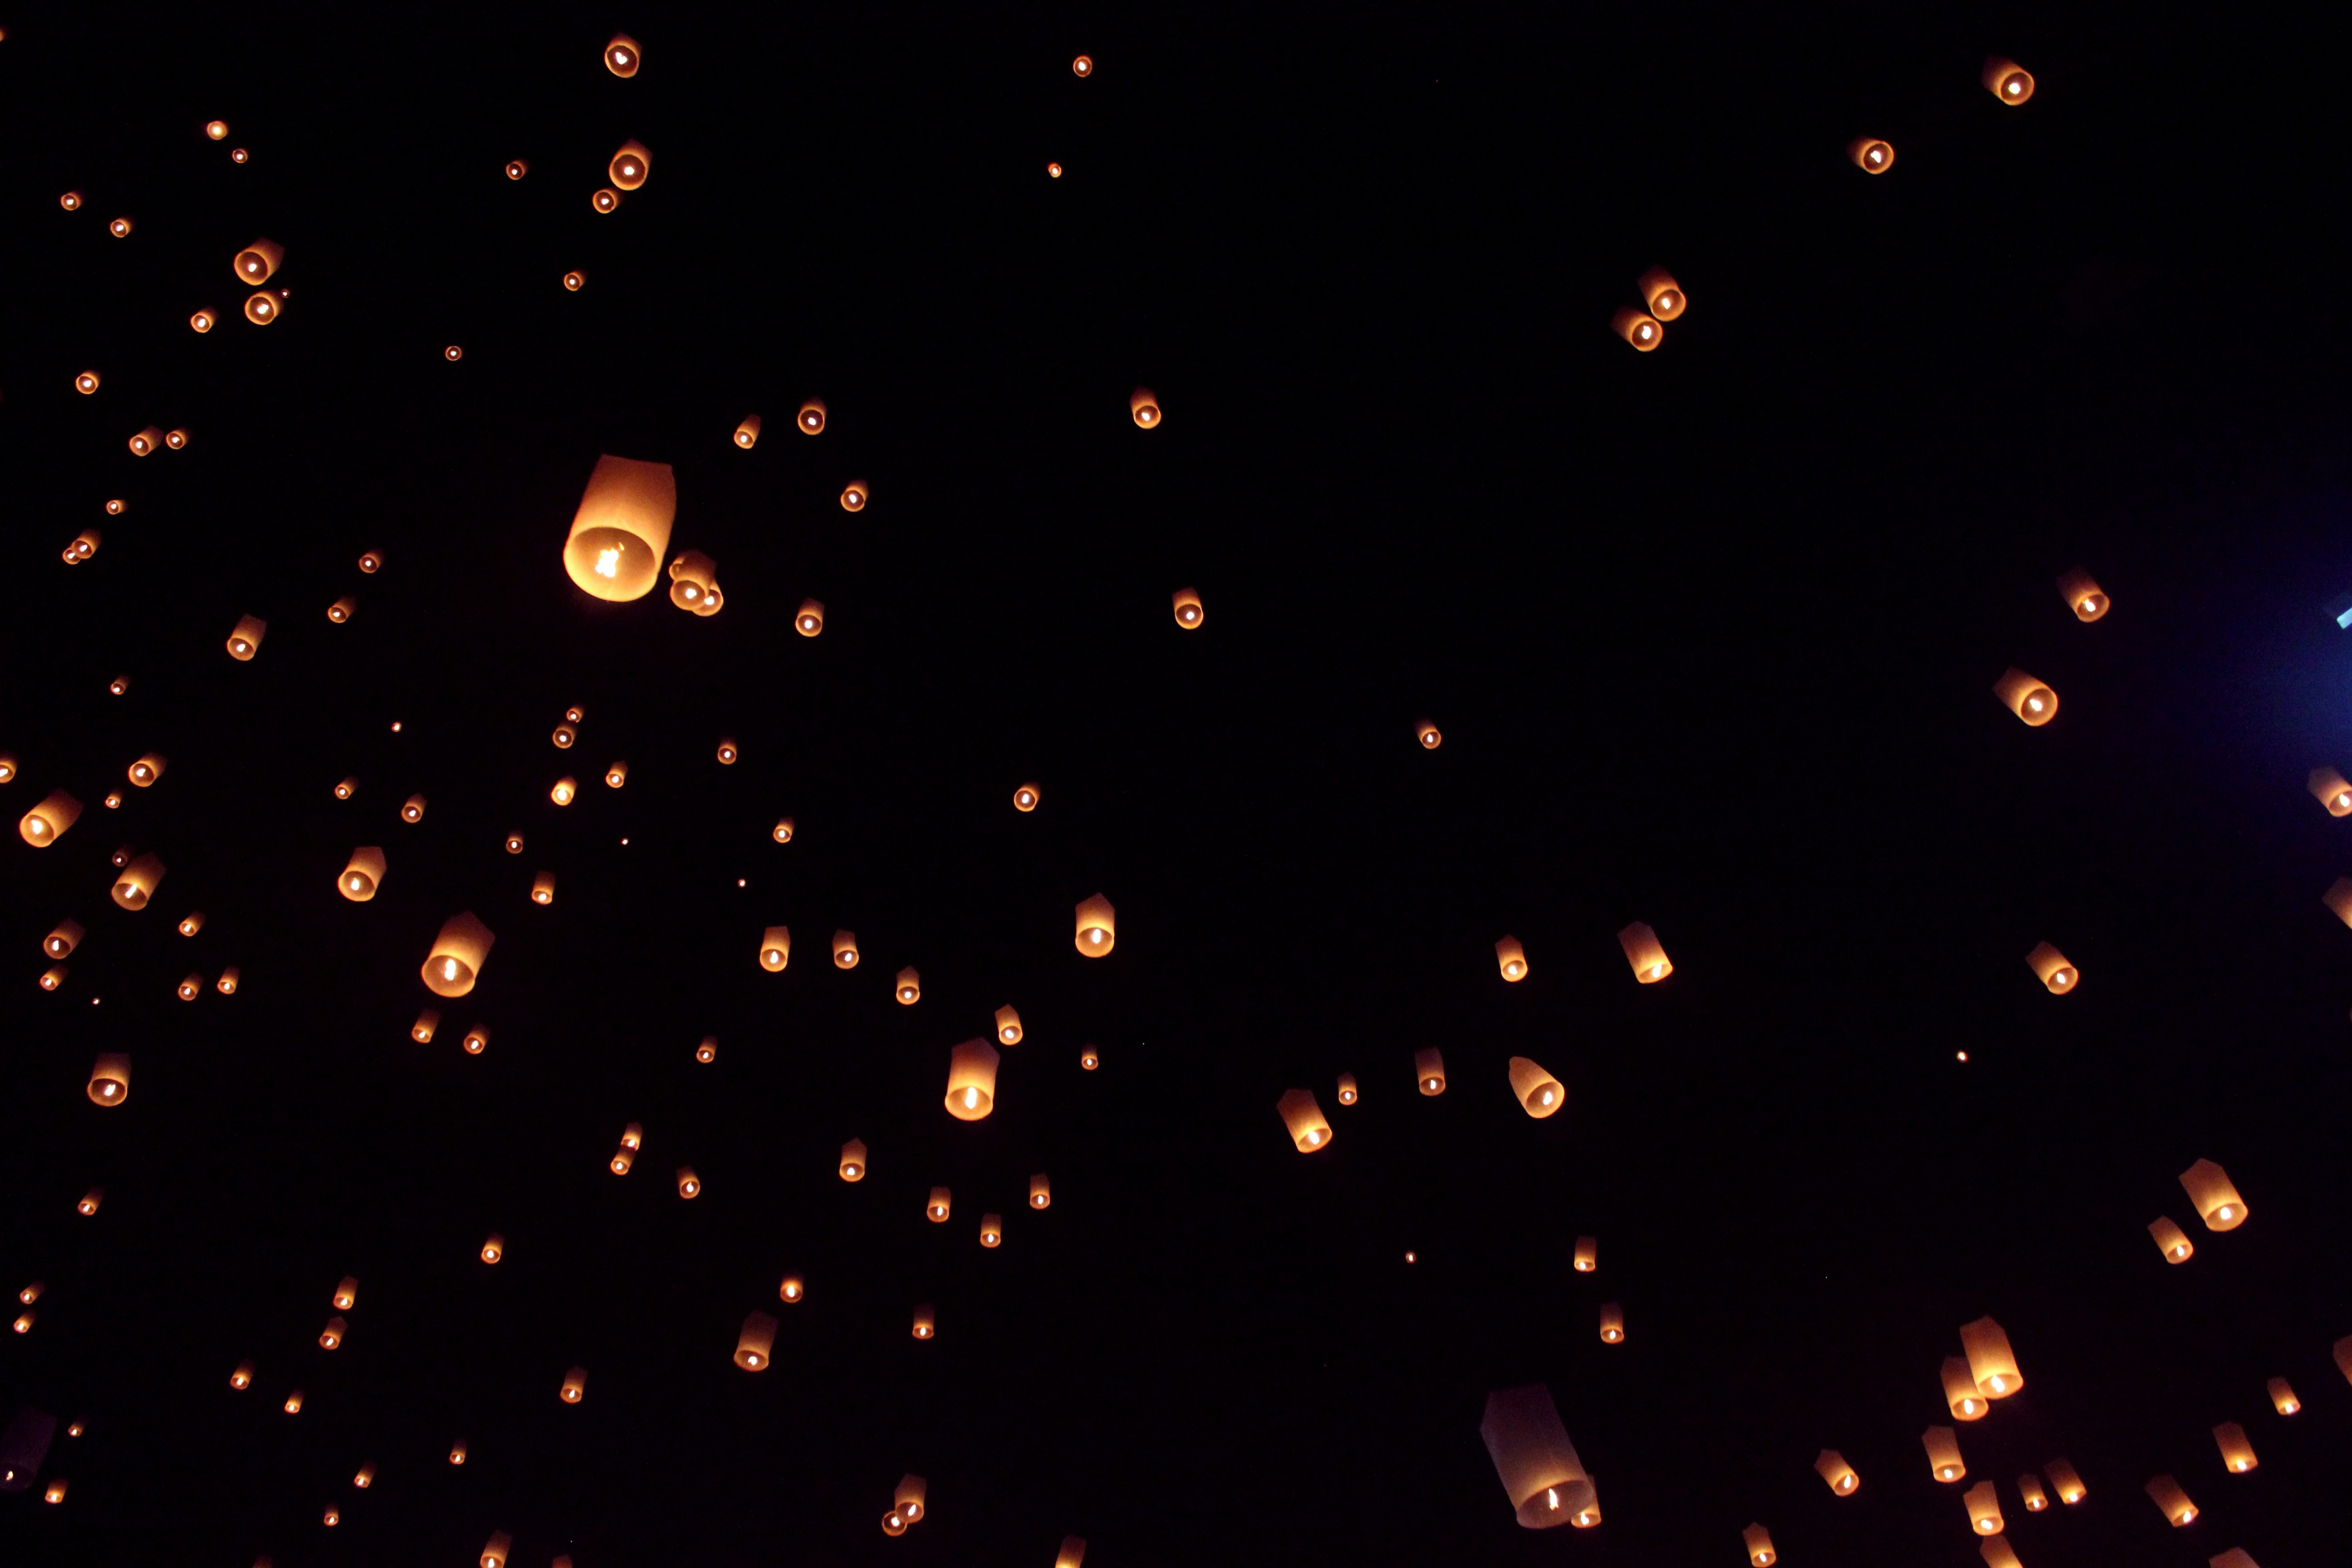 The release of thousands of paper lanterns for the annual Yee Ping Festival in Chiang Mai, Thailand.